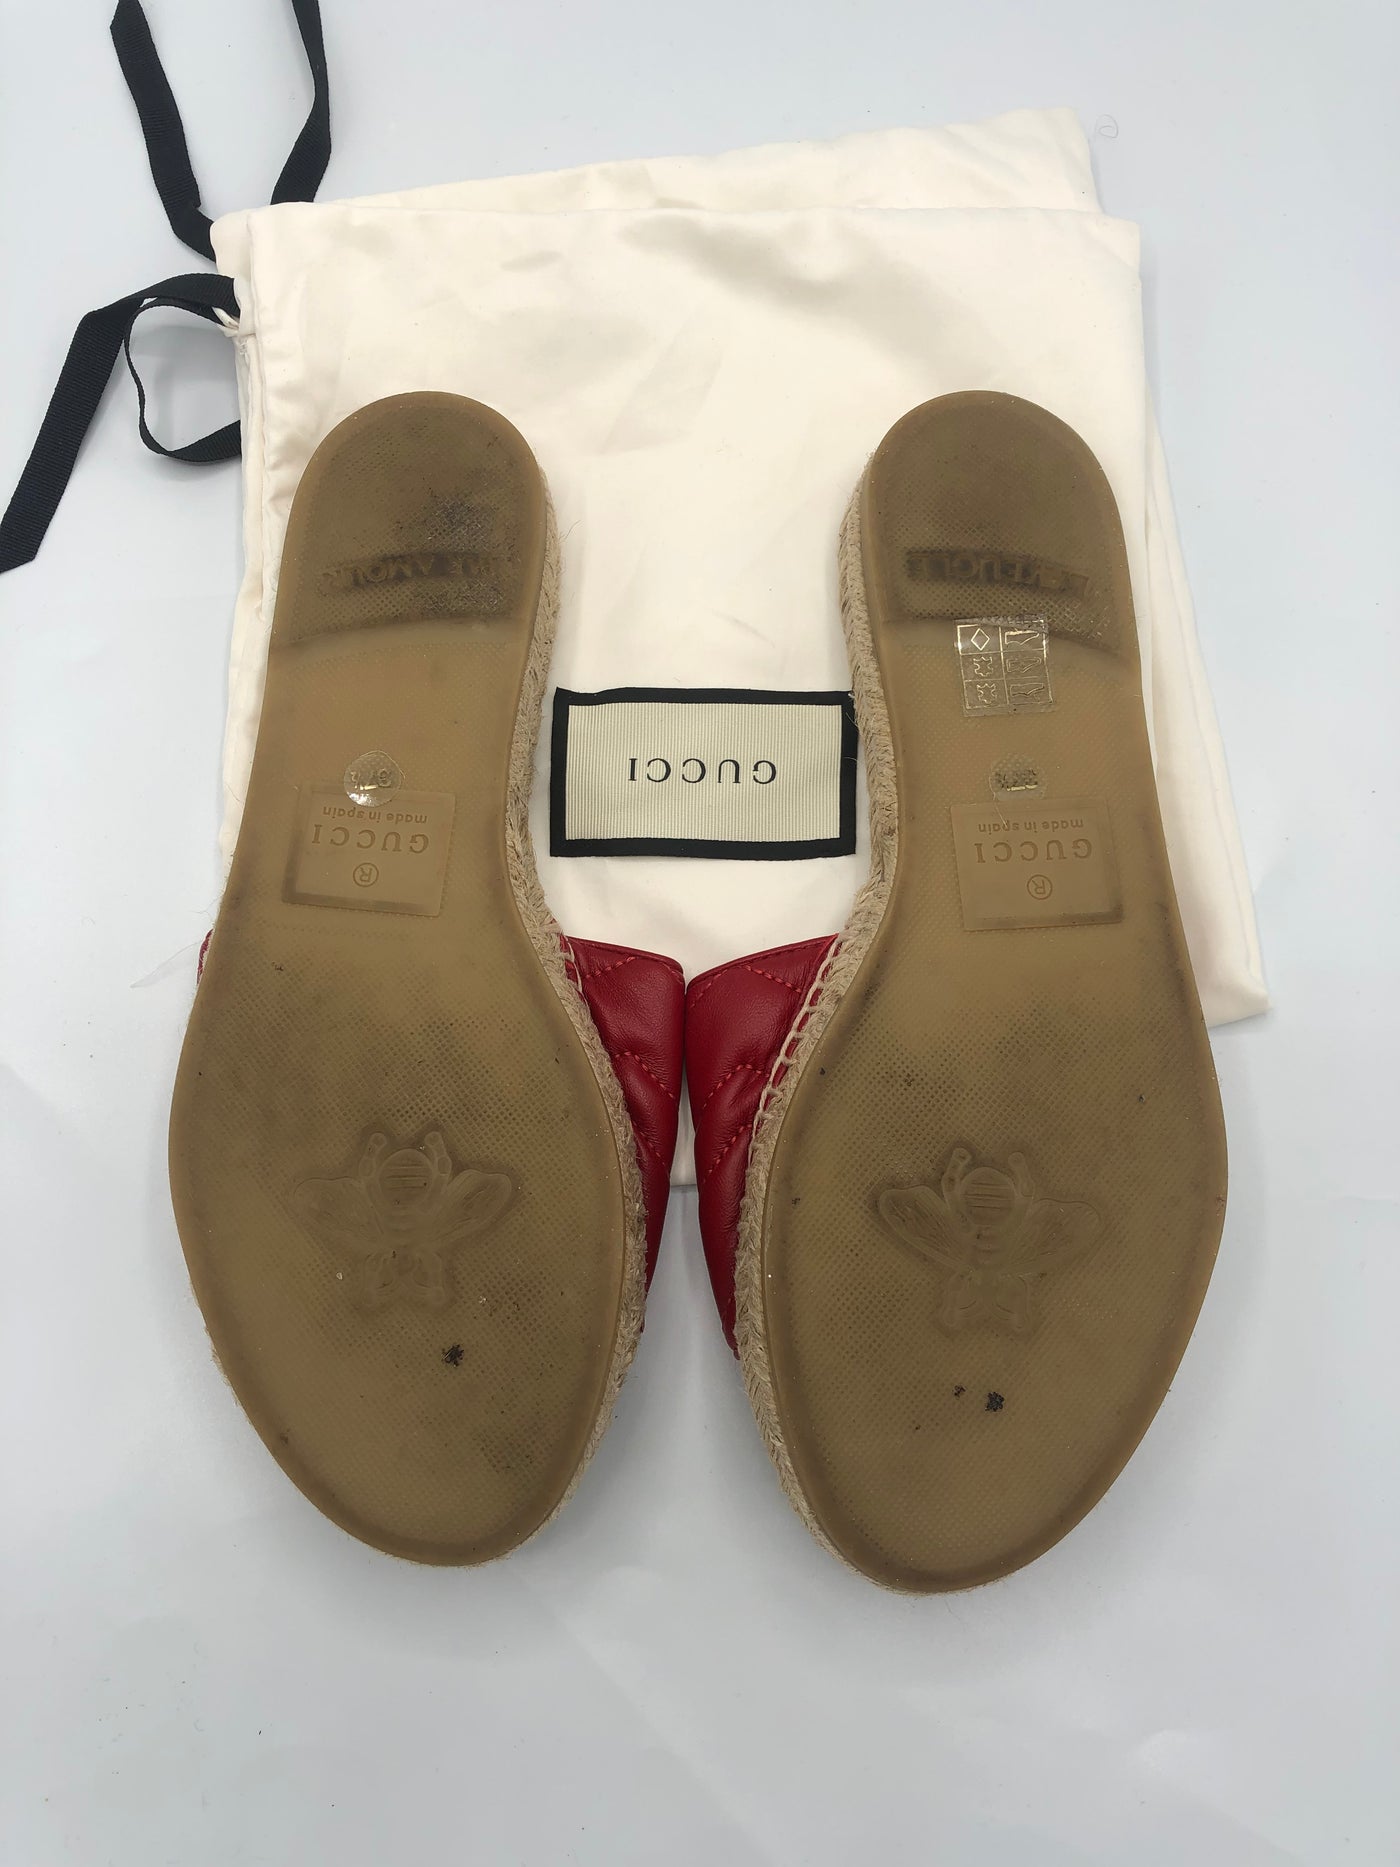 GUCCI red Marmont “GG” Slides size 37.5